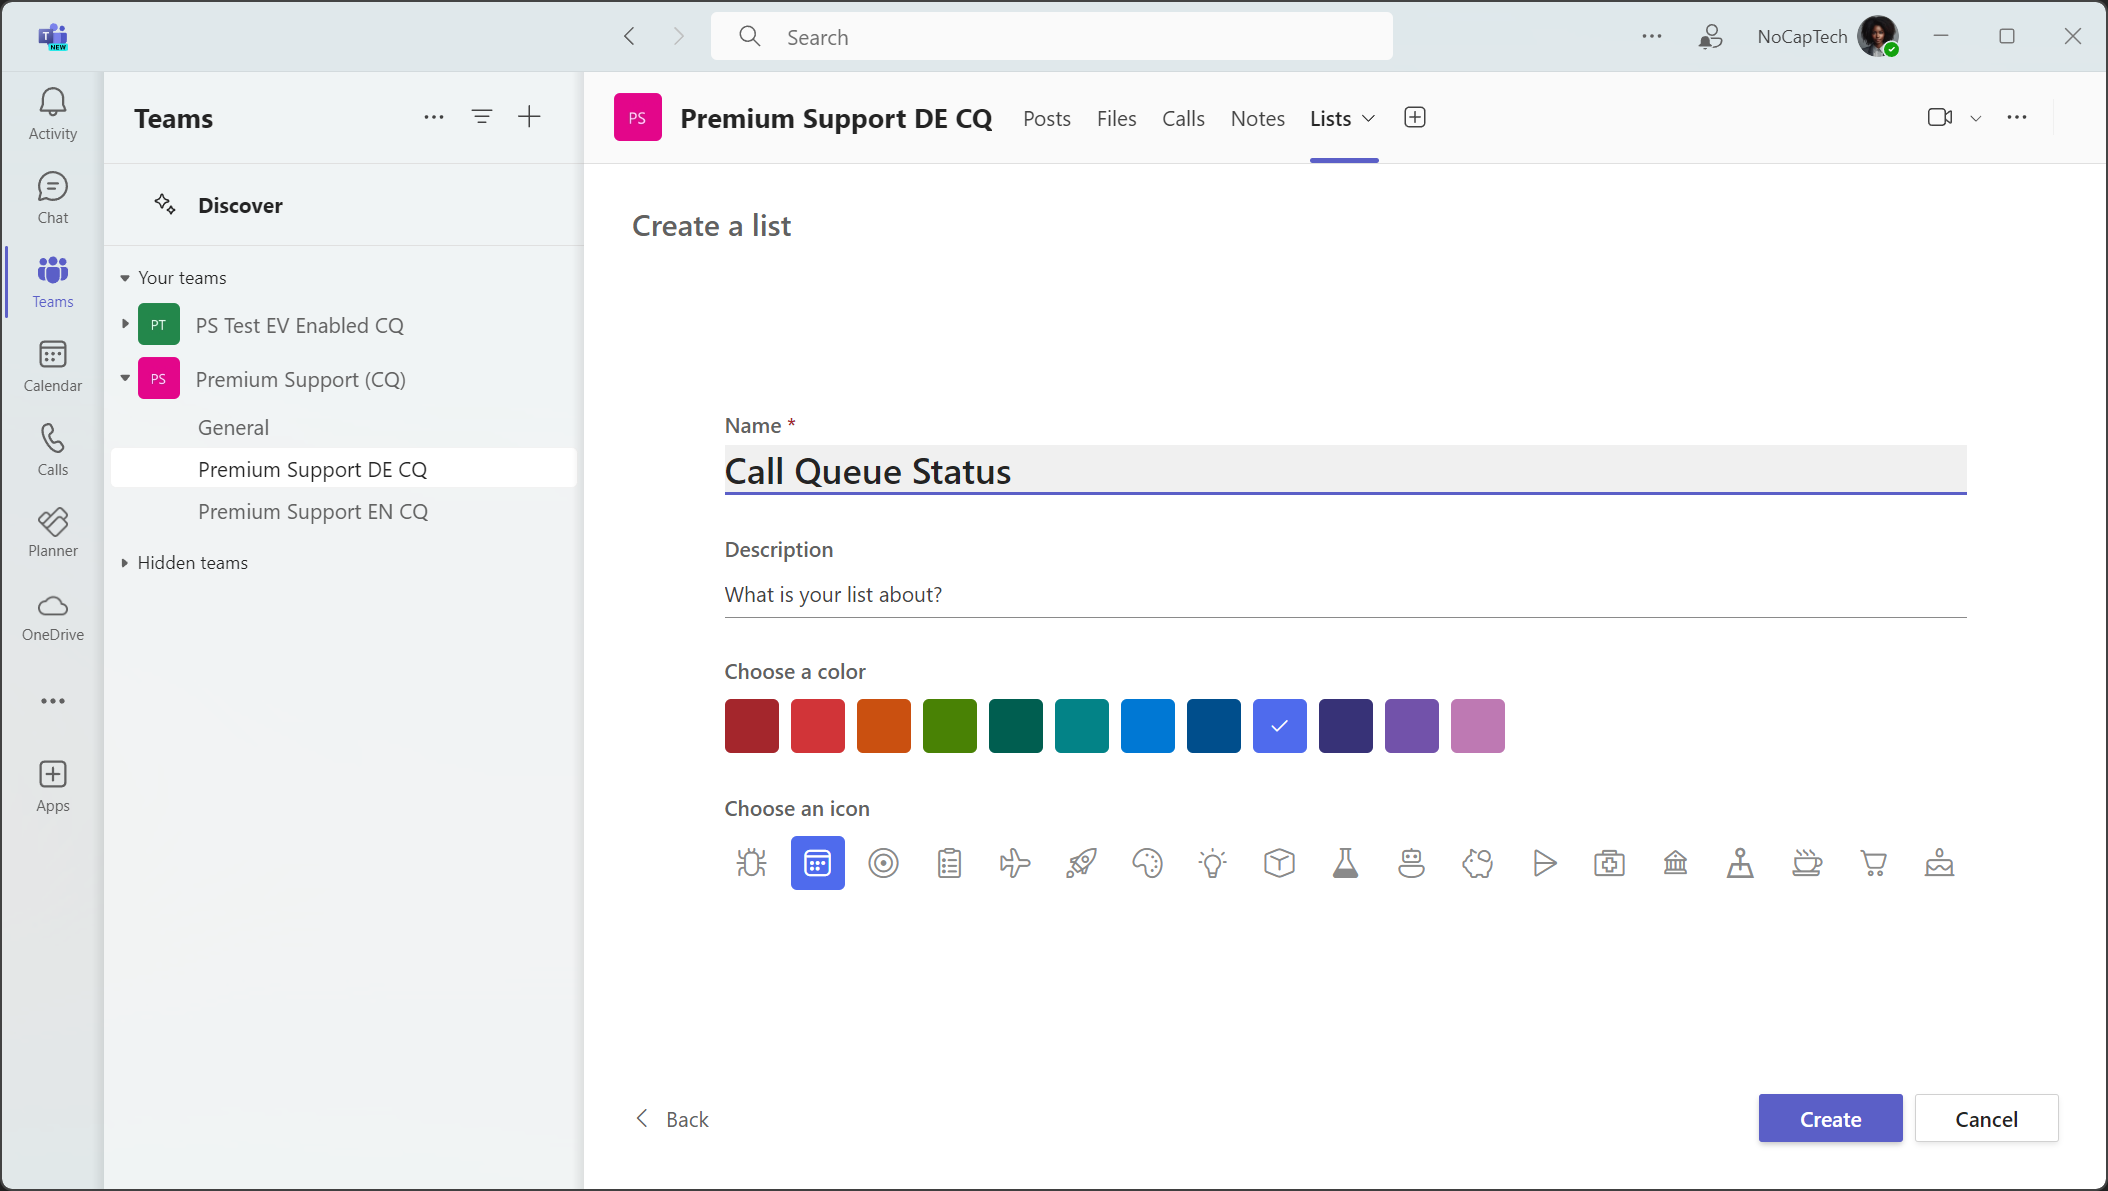 Give your list a name and select a color and an icon. Then click create.